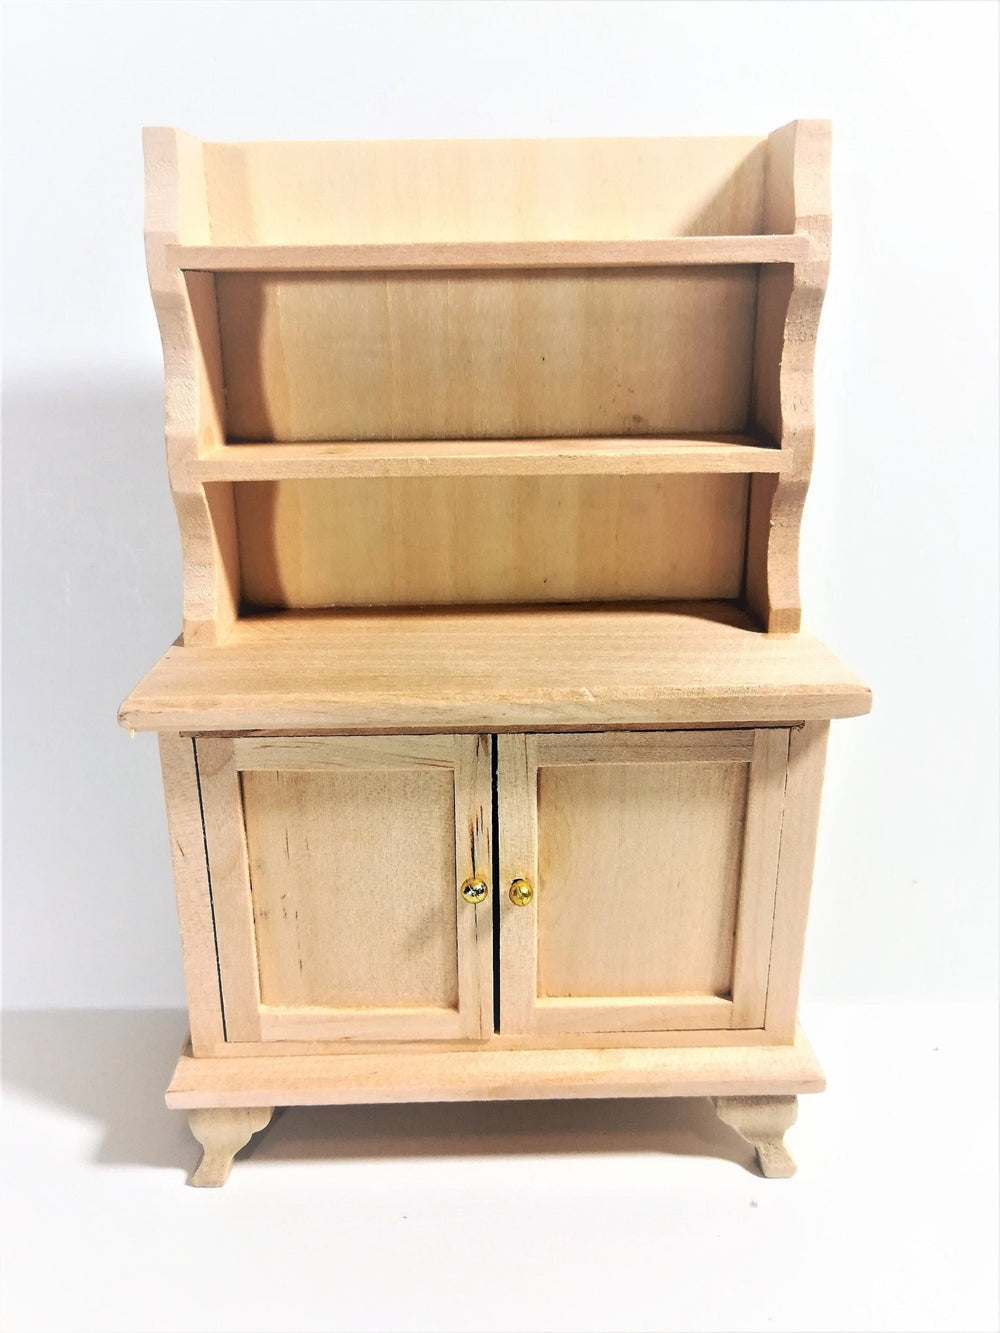 Dollhouse Miniature Unfinished Kitchen or Dining Room Hutch Buffet with Shelves 1:12 Scale Furniture - Miniature Crush